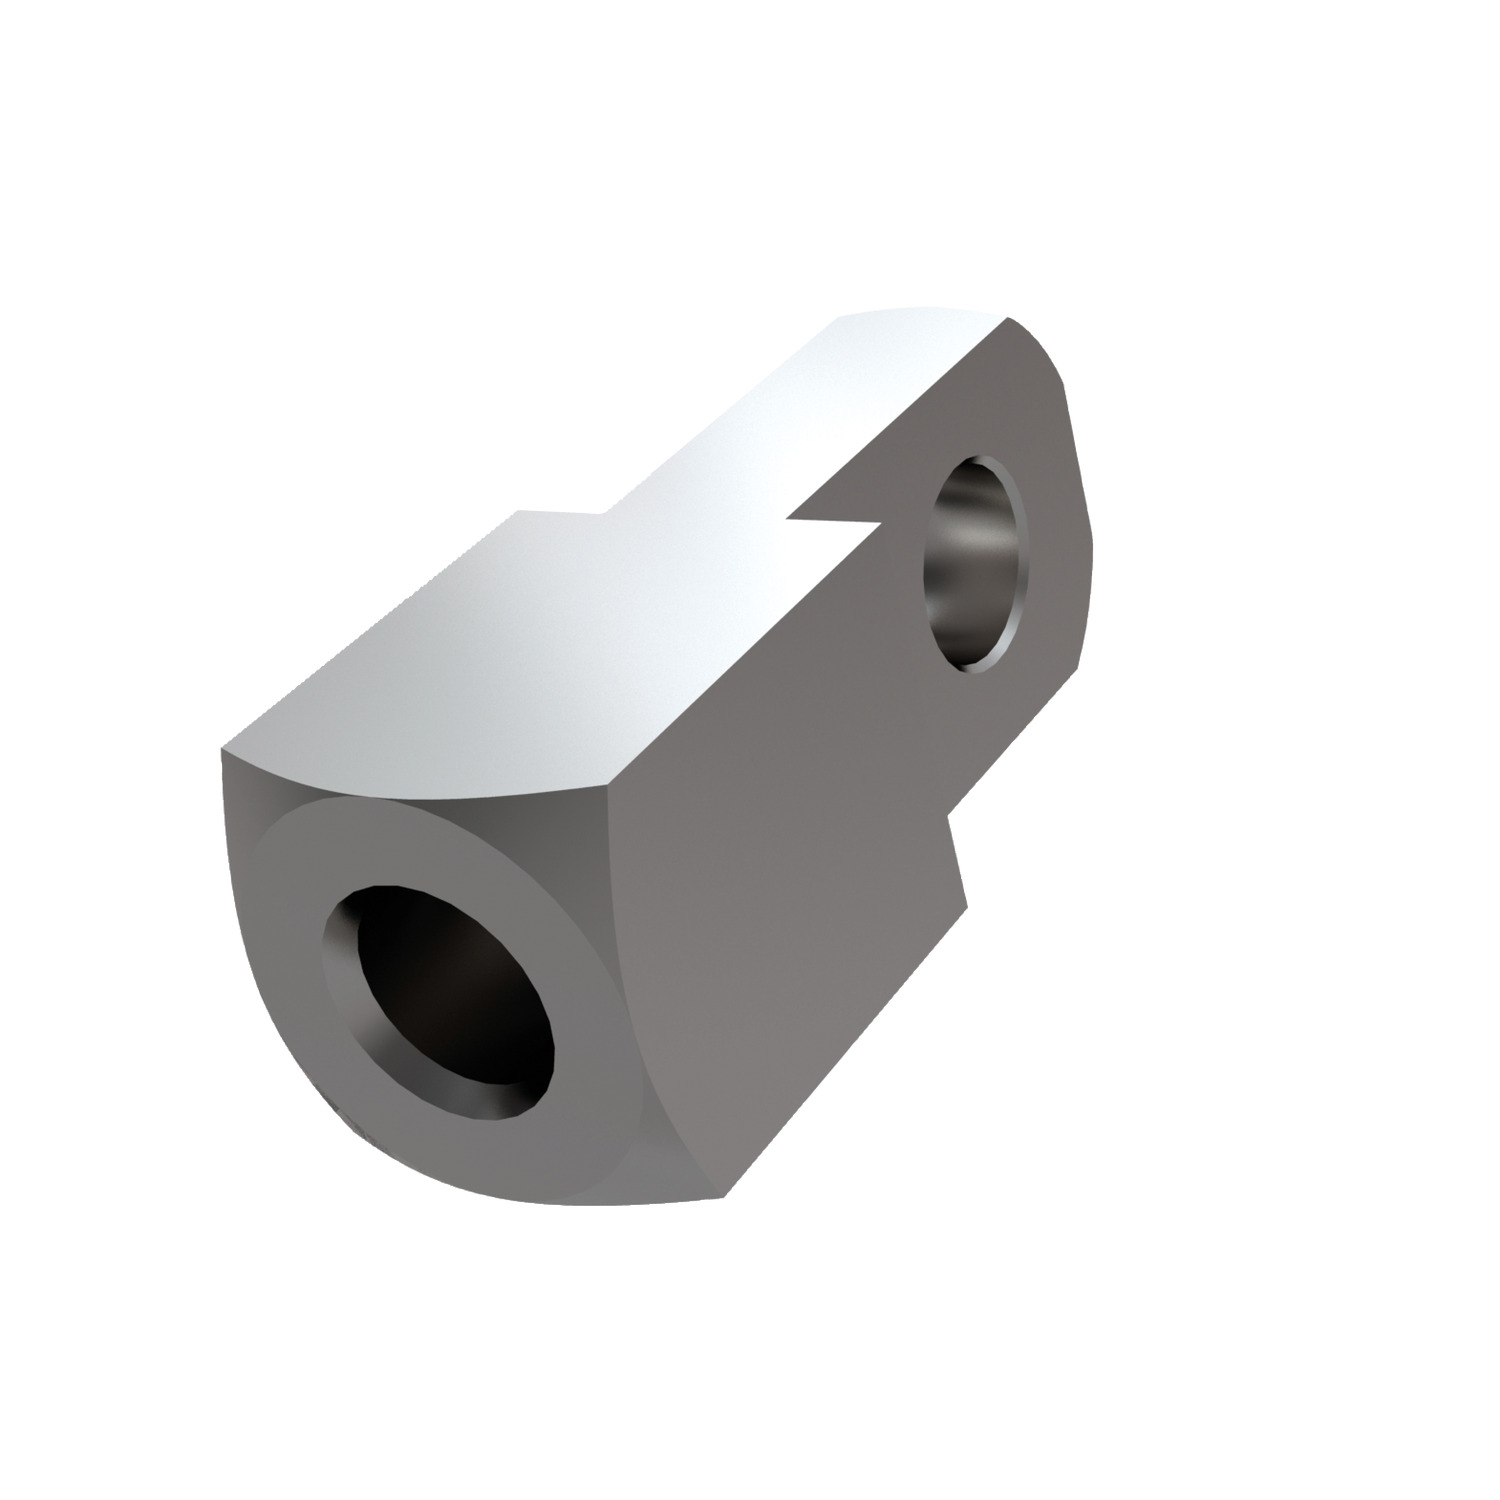 65657 - Stainless Mating Piece for Clevis Joints 